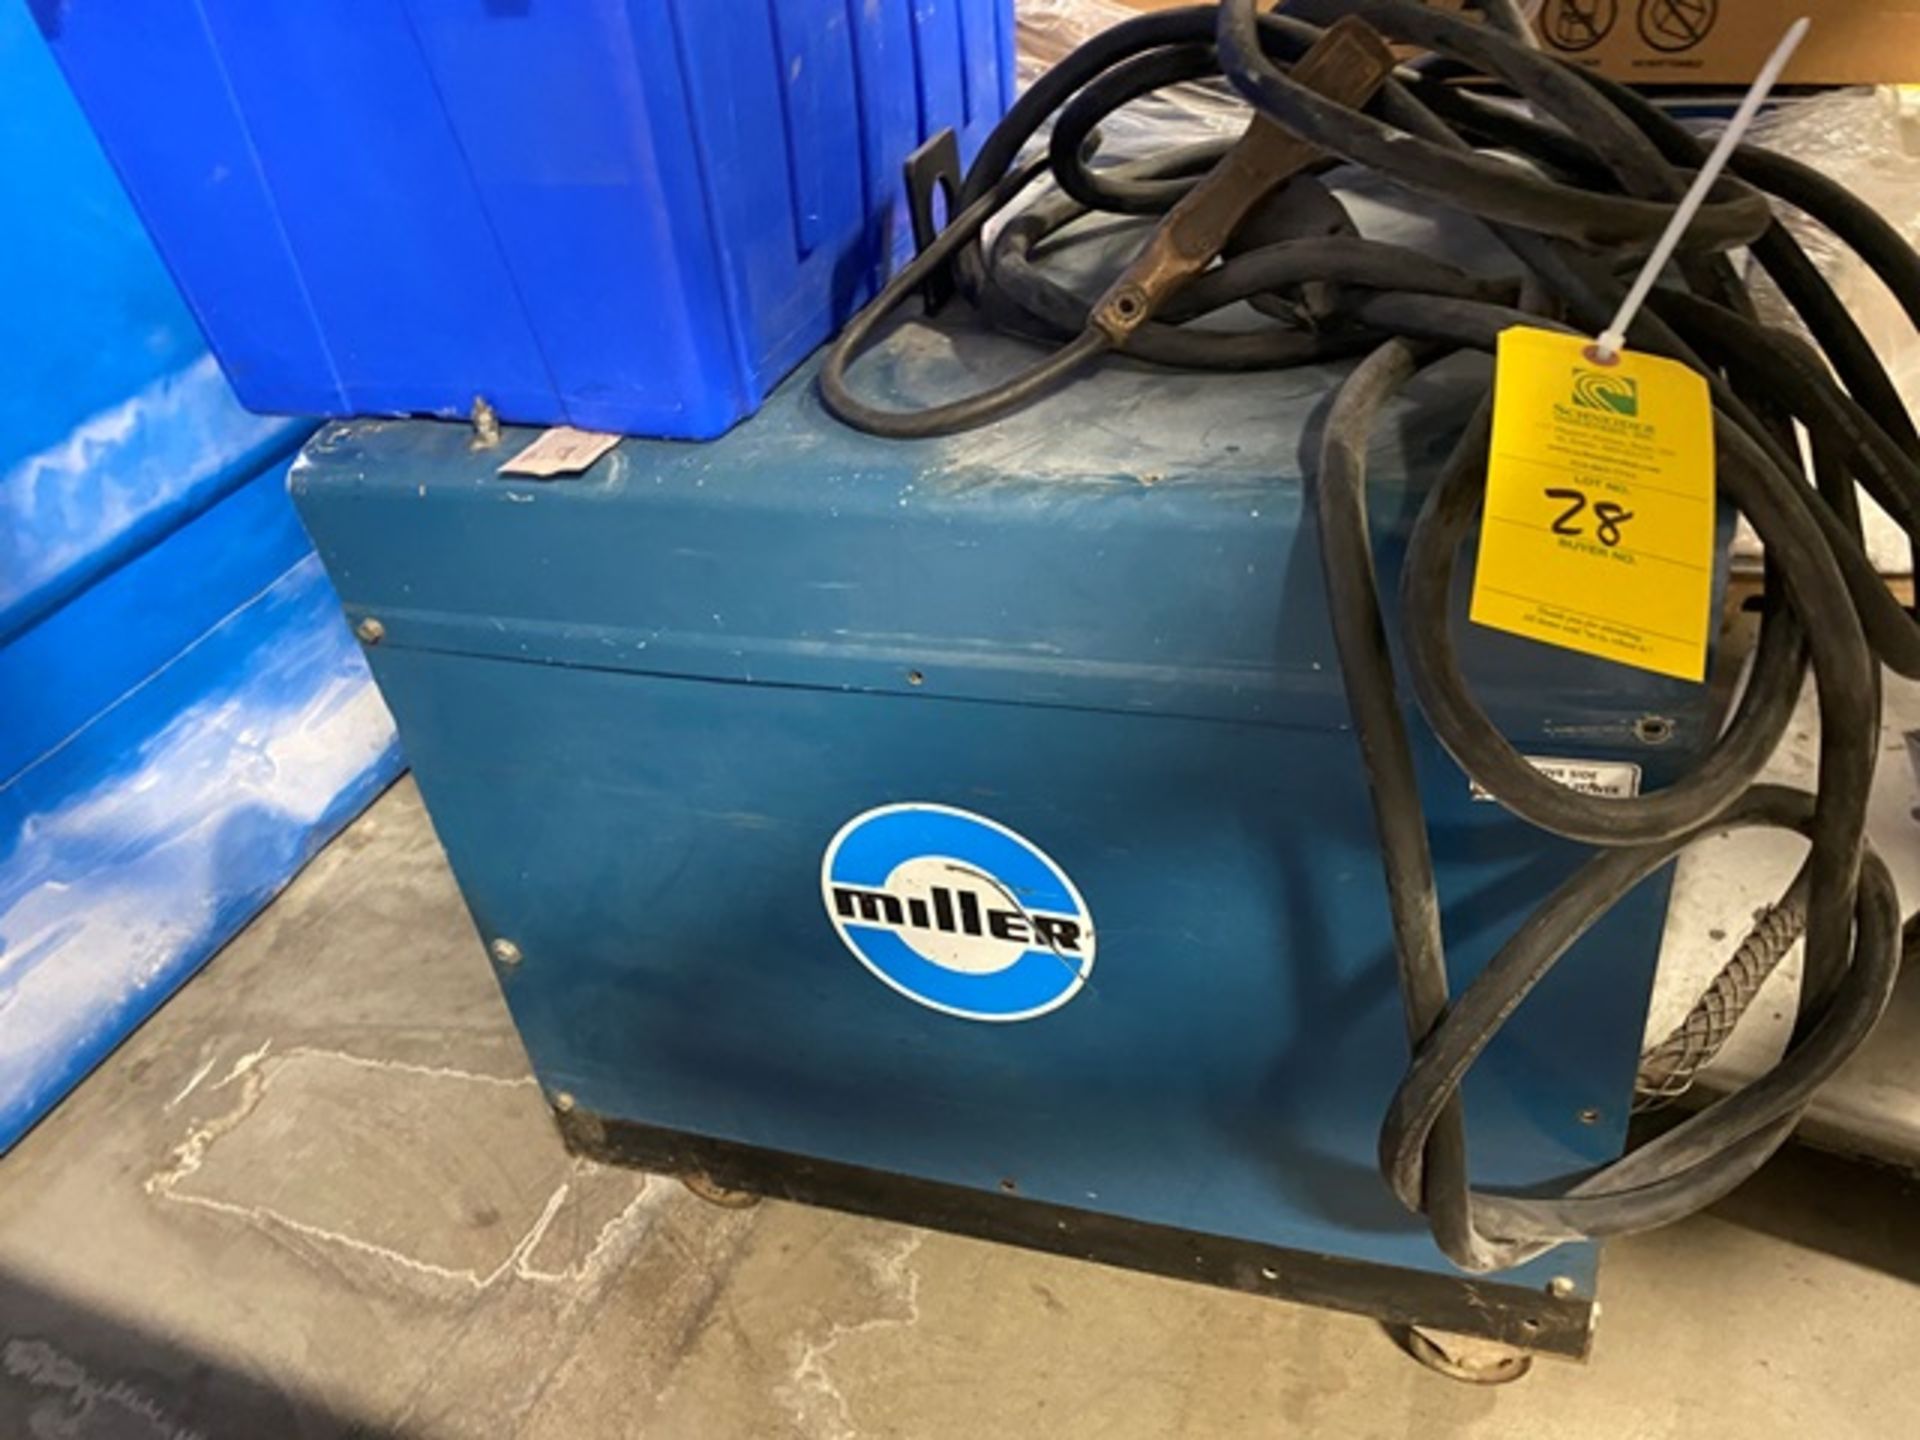 Miller Dialarc 250 AC/DC Welder, Located in Lakeville, MN - Image 2 of 3